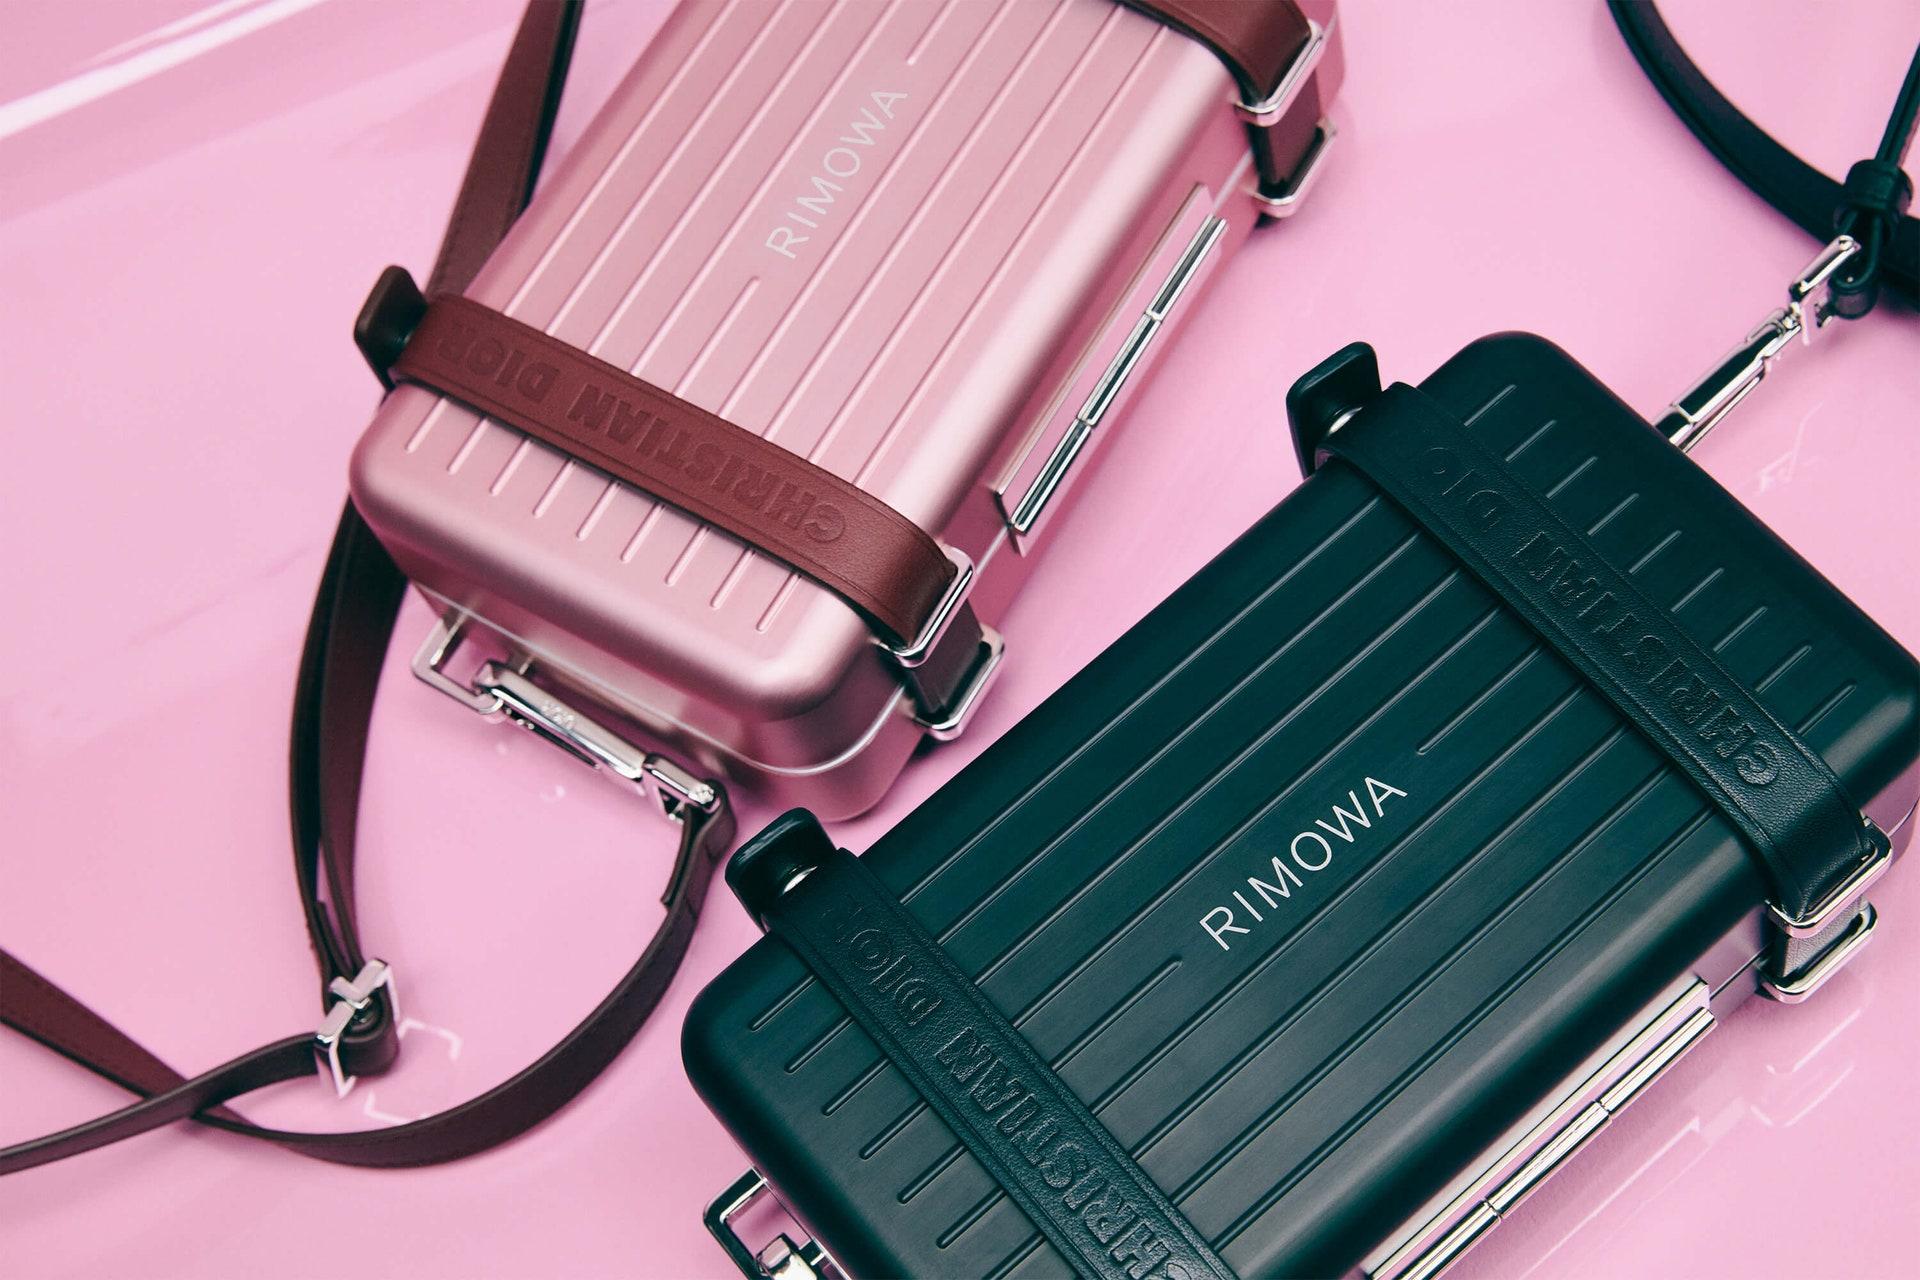 The DIOR and RIMOWA personal clutch is a compact accessory designed for easy, everyday carriage. It is made from lightweight aluminum and features 'Christian Dior' logo embossed leather straps that fasten around the bag with snap buttons. The